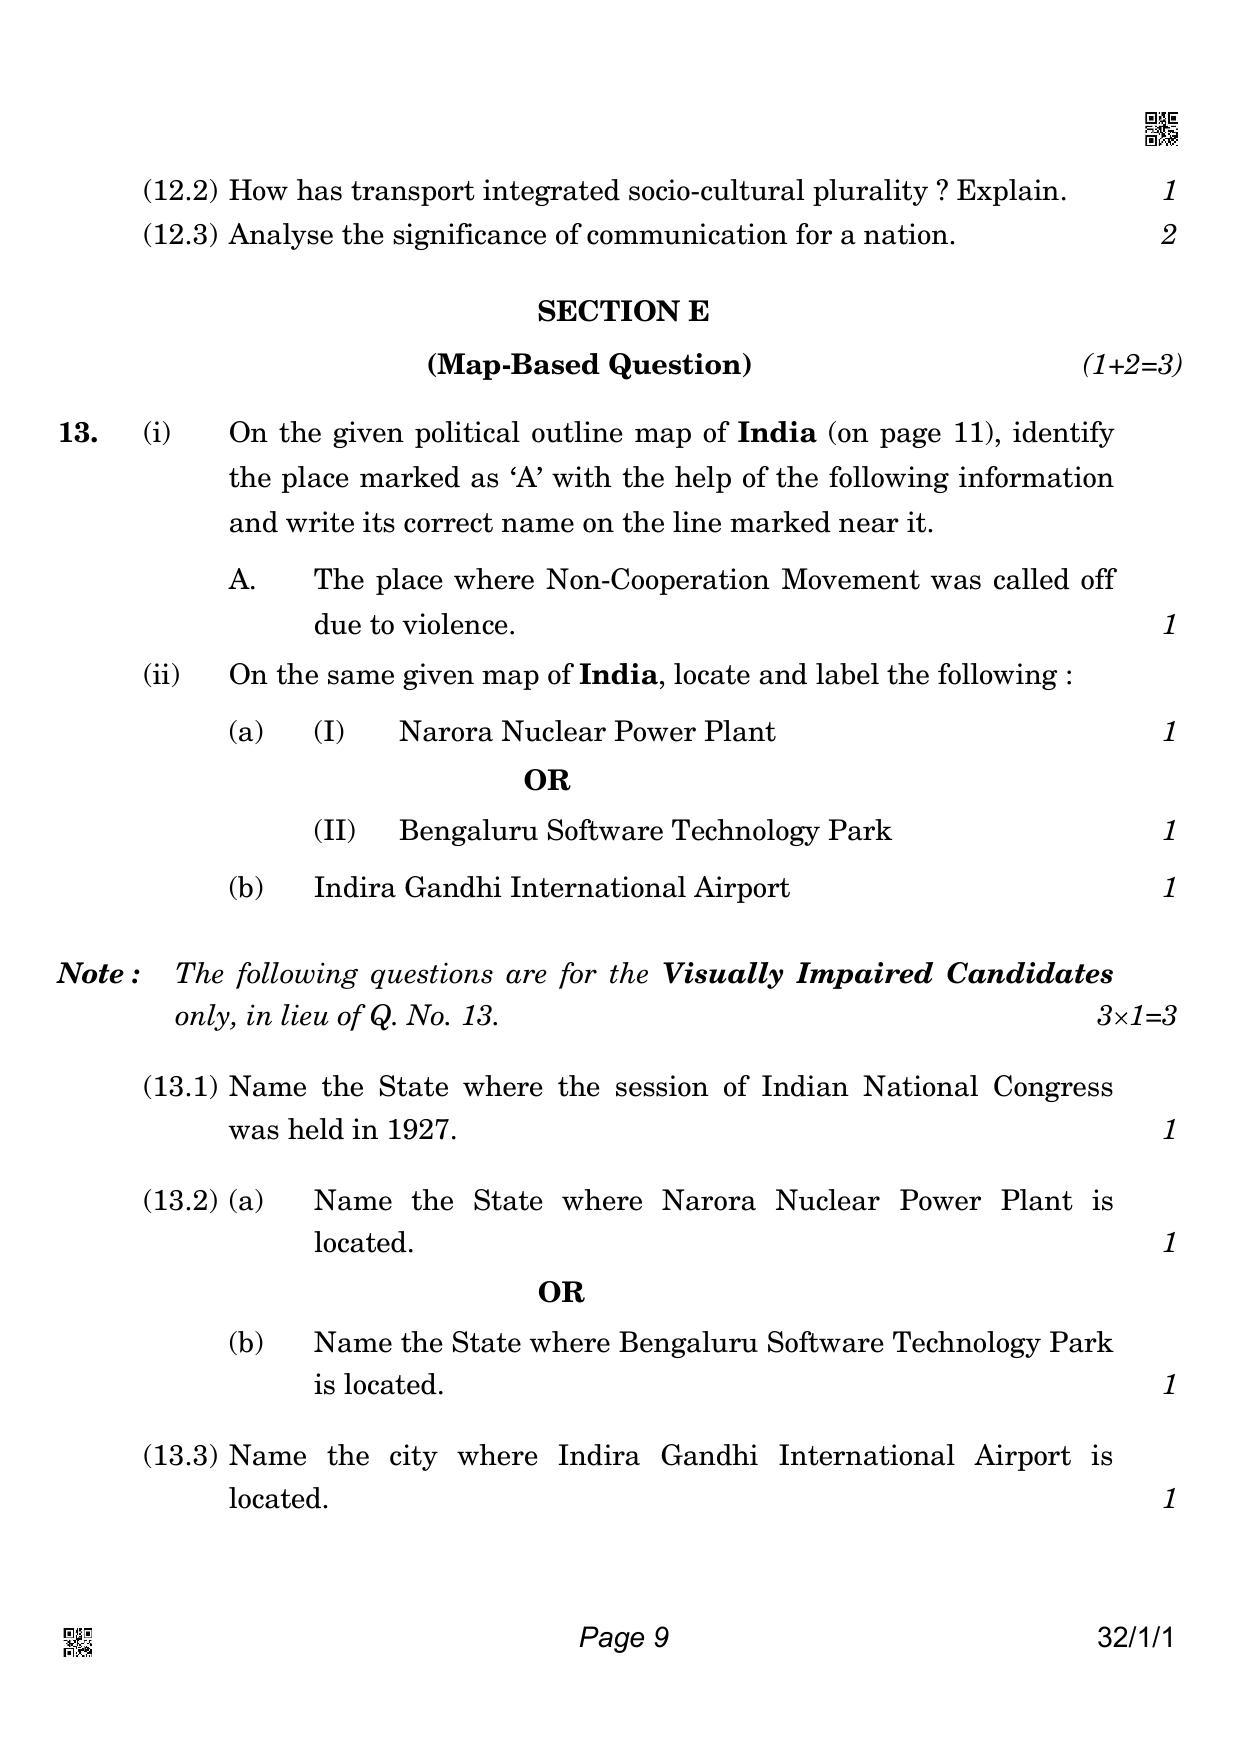 CBSE Class 10 32-1-1 Social Science 2022 Question Paper - Page 9